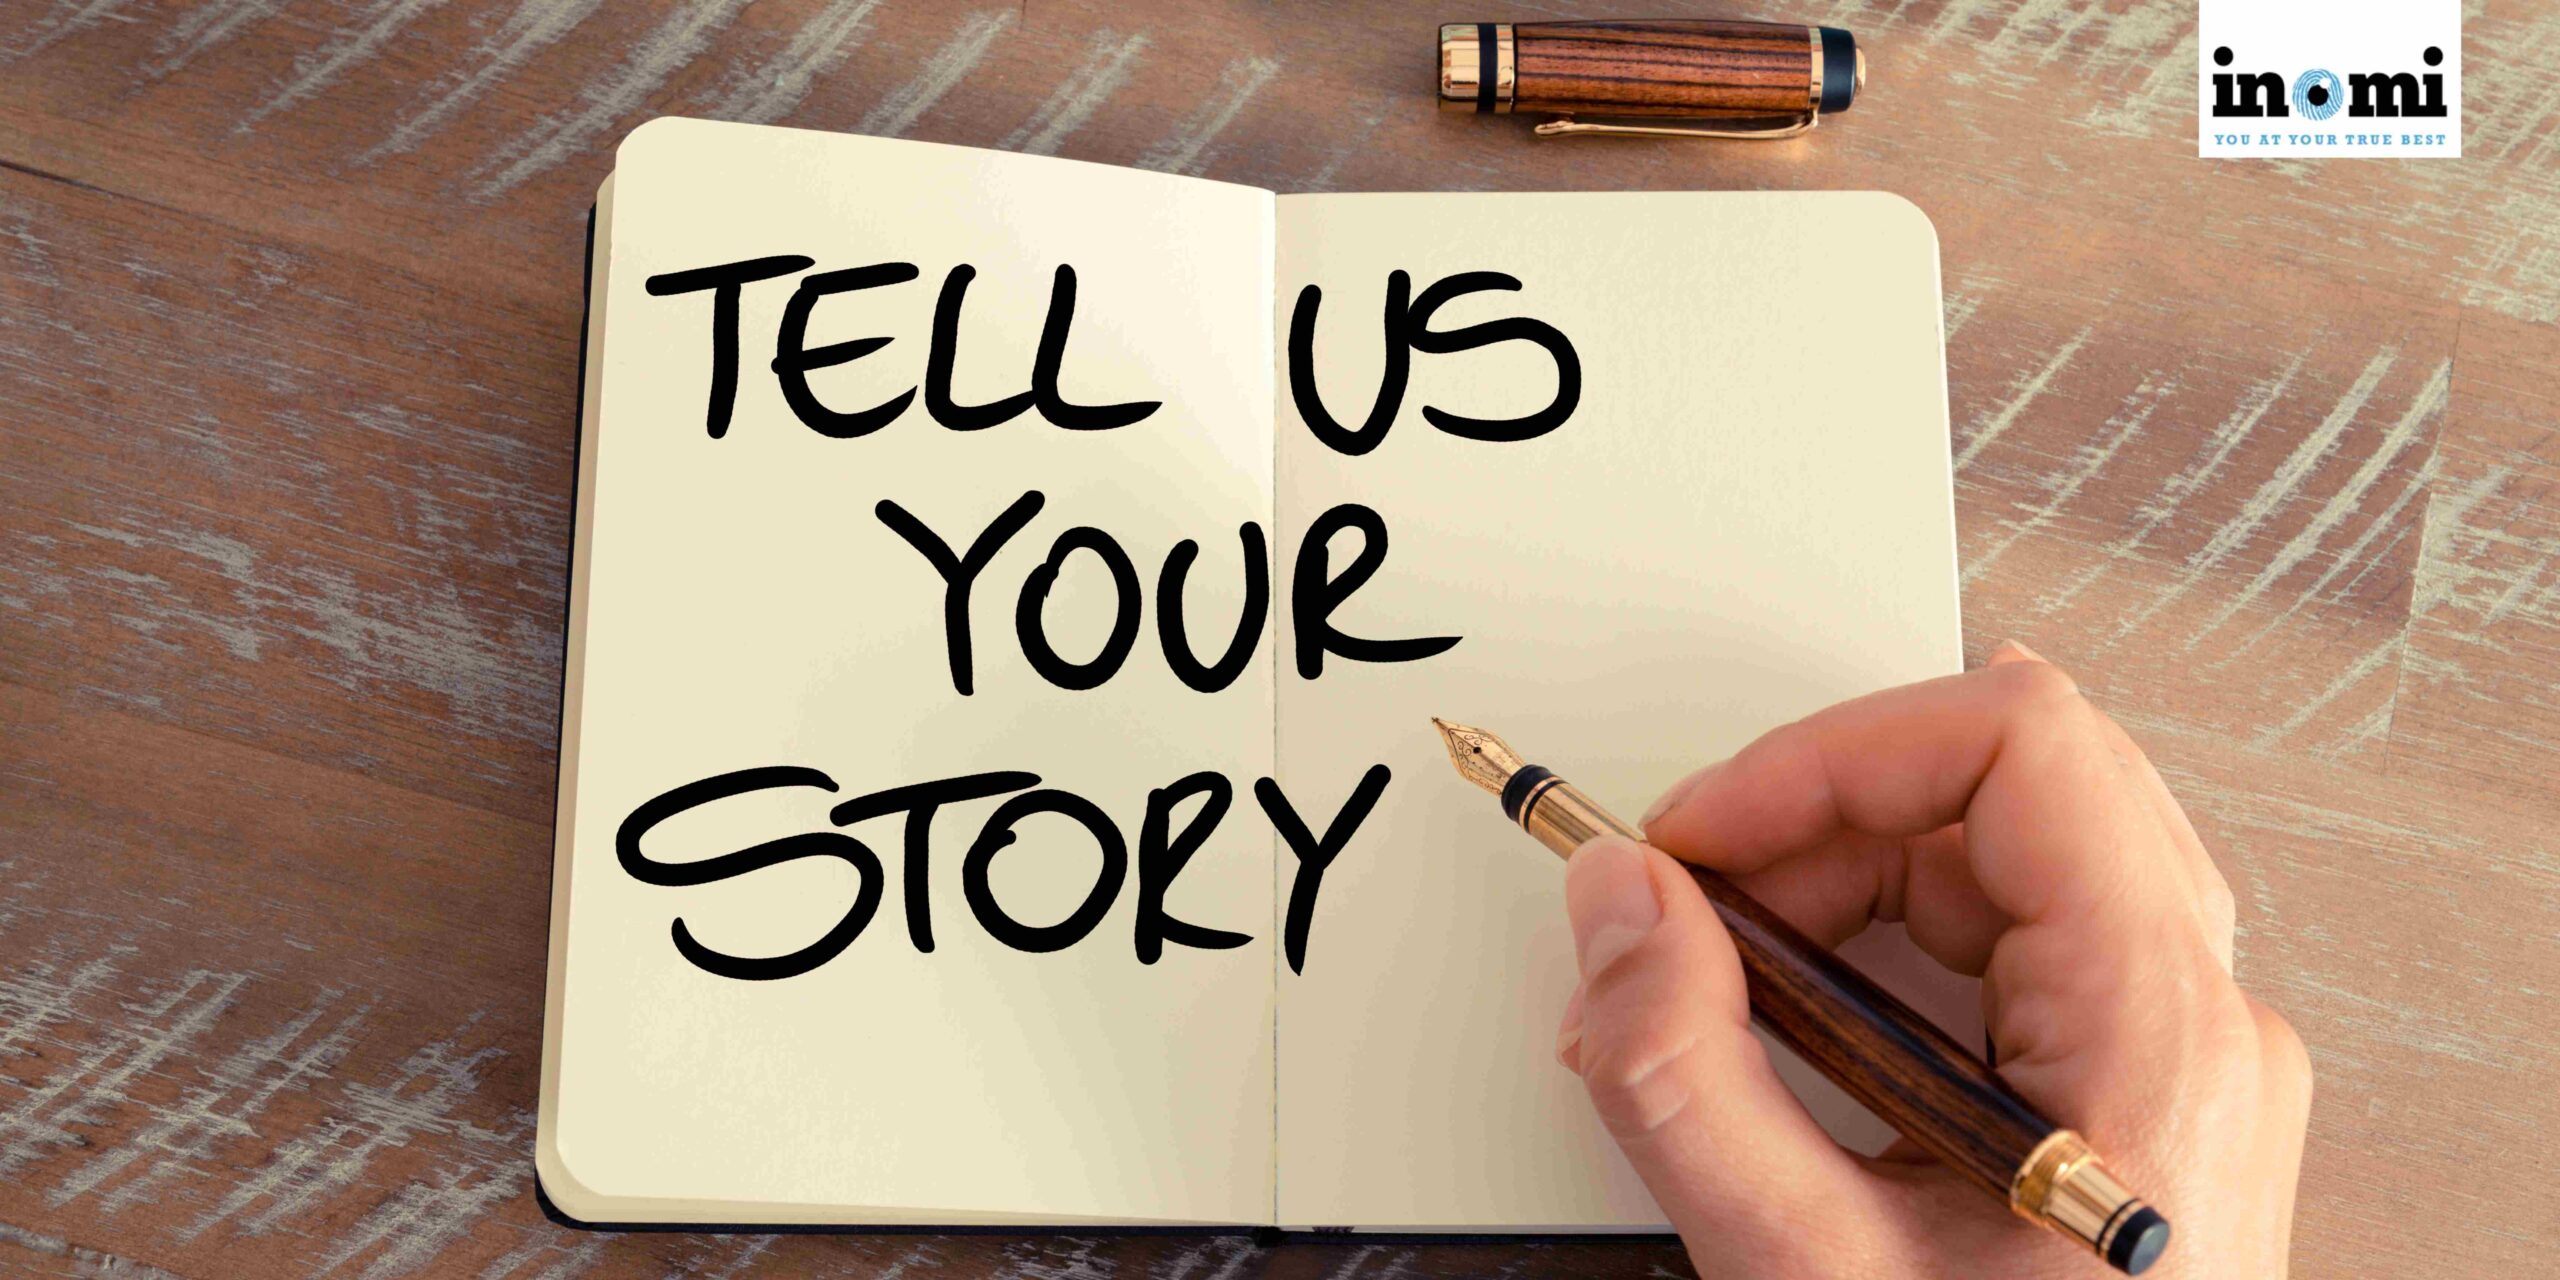 Tell your story to the admissions committee